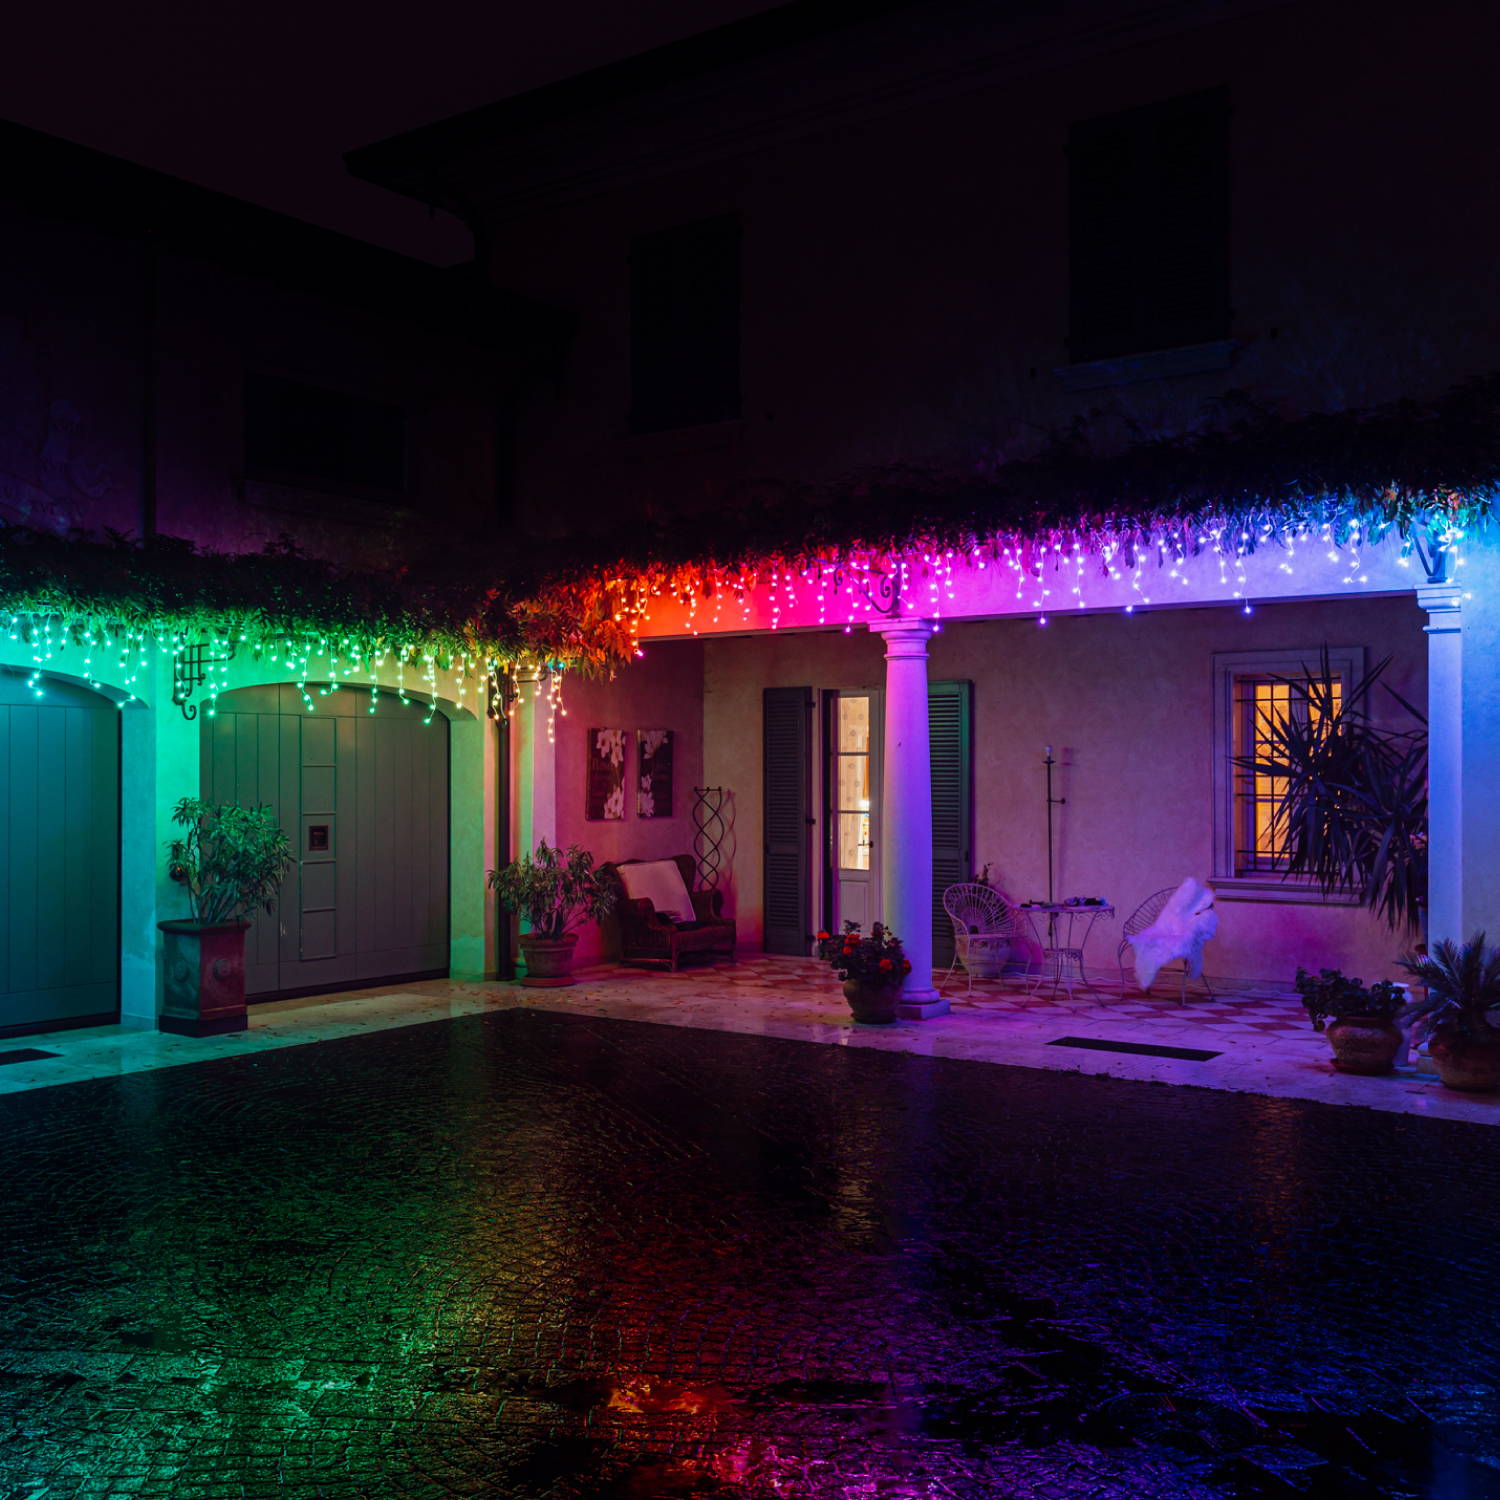 Multi coloured Twinkly icicle lights displayed along roof edge